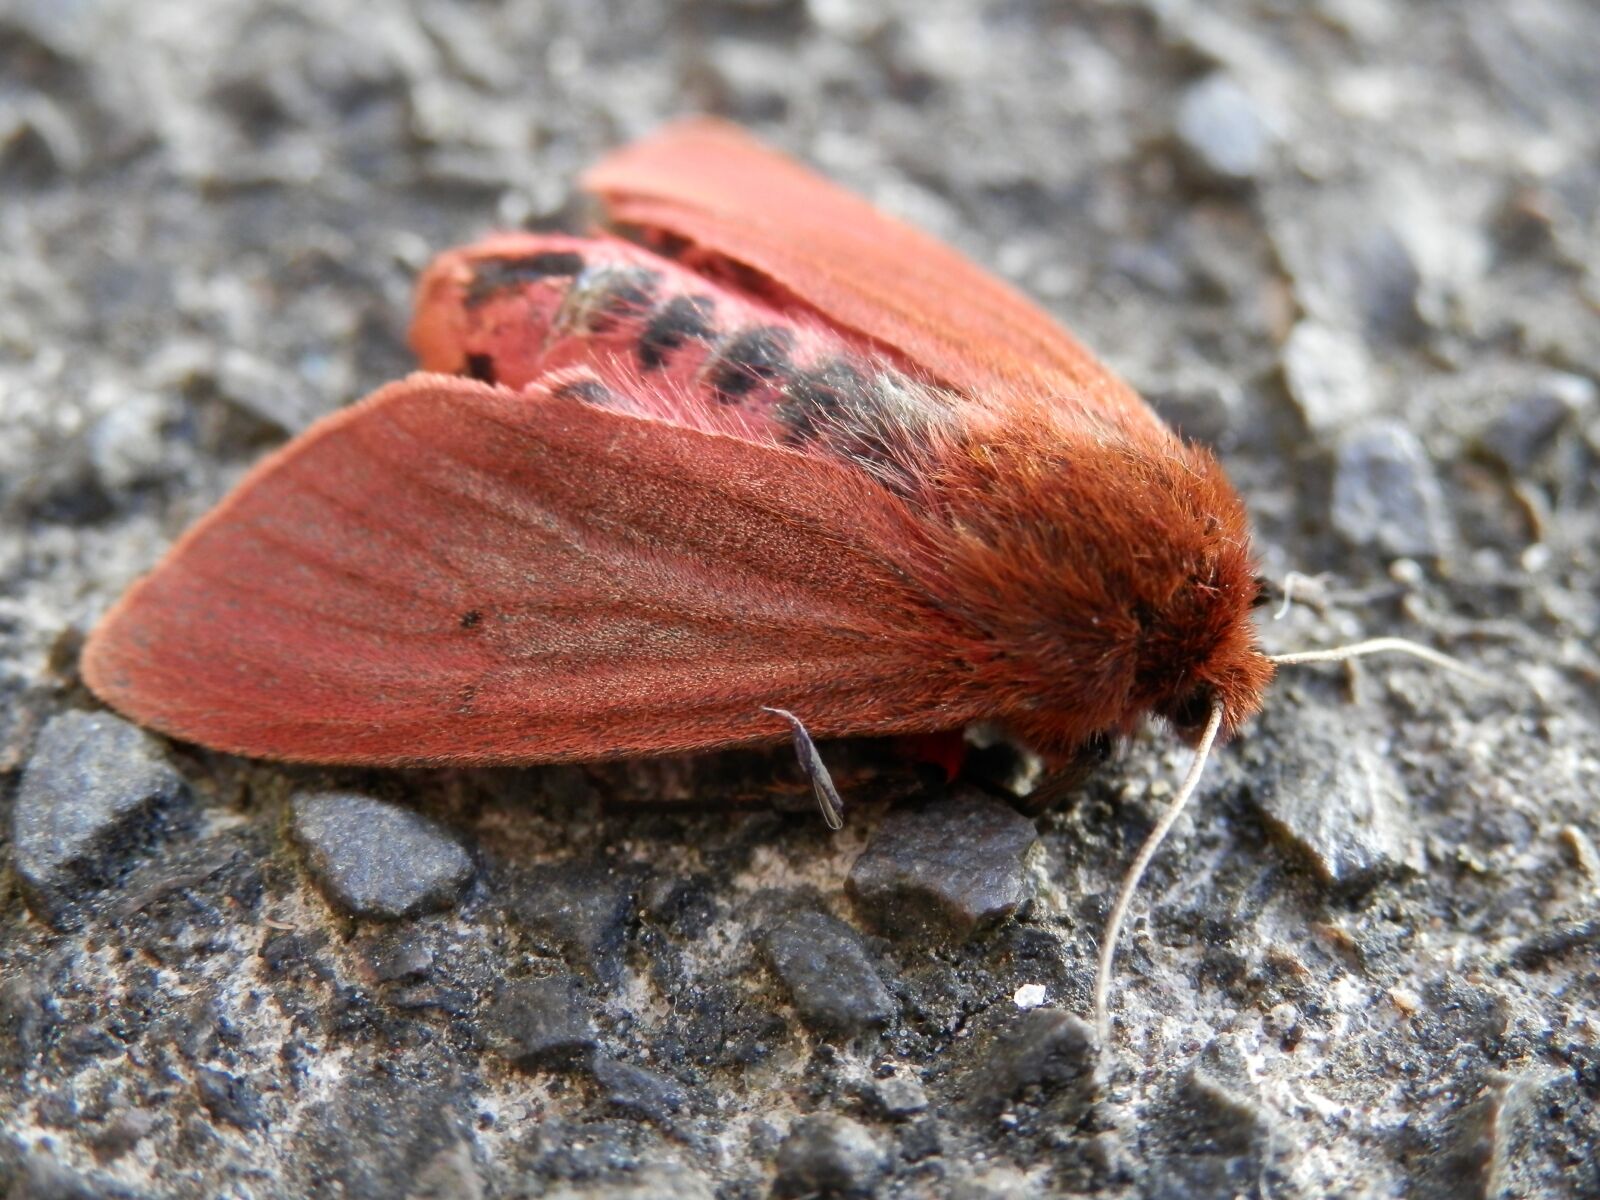 Olympus SZ-14 sample photo. Moth, red, insect photography